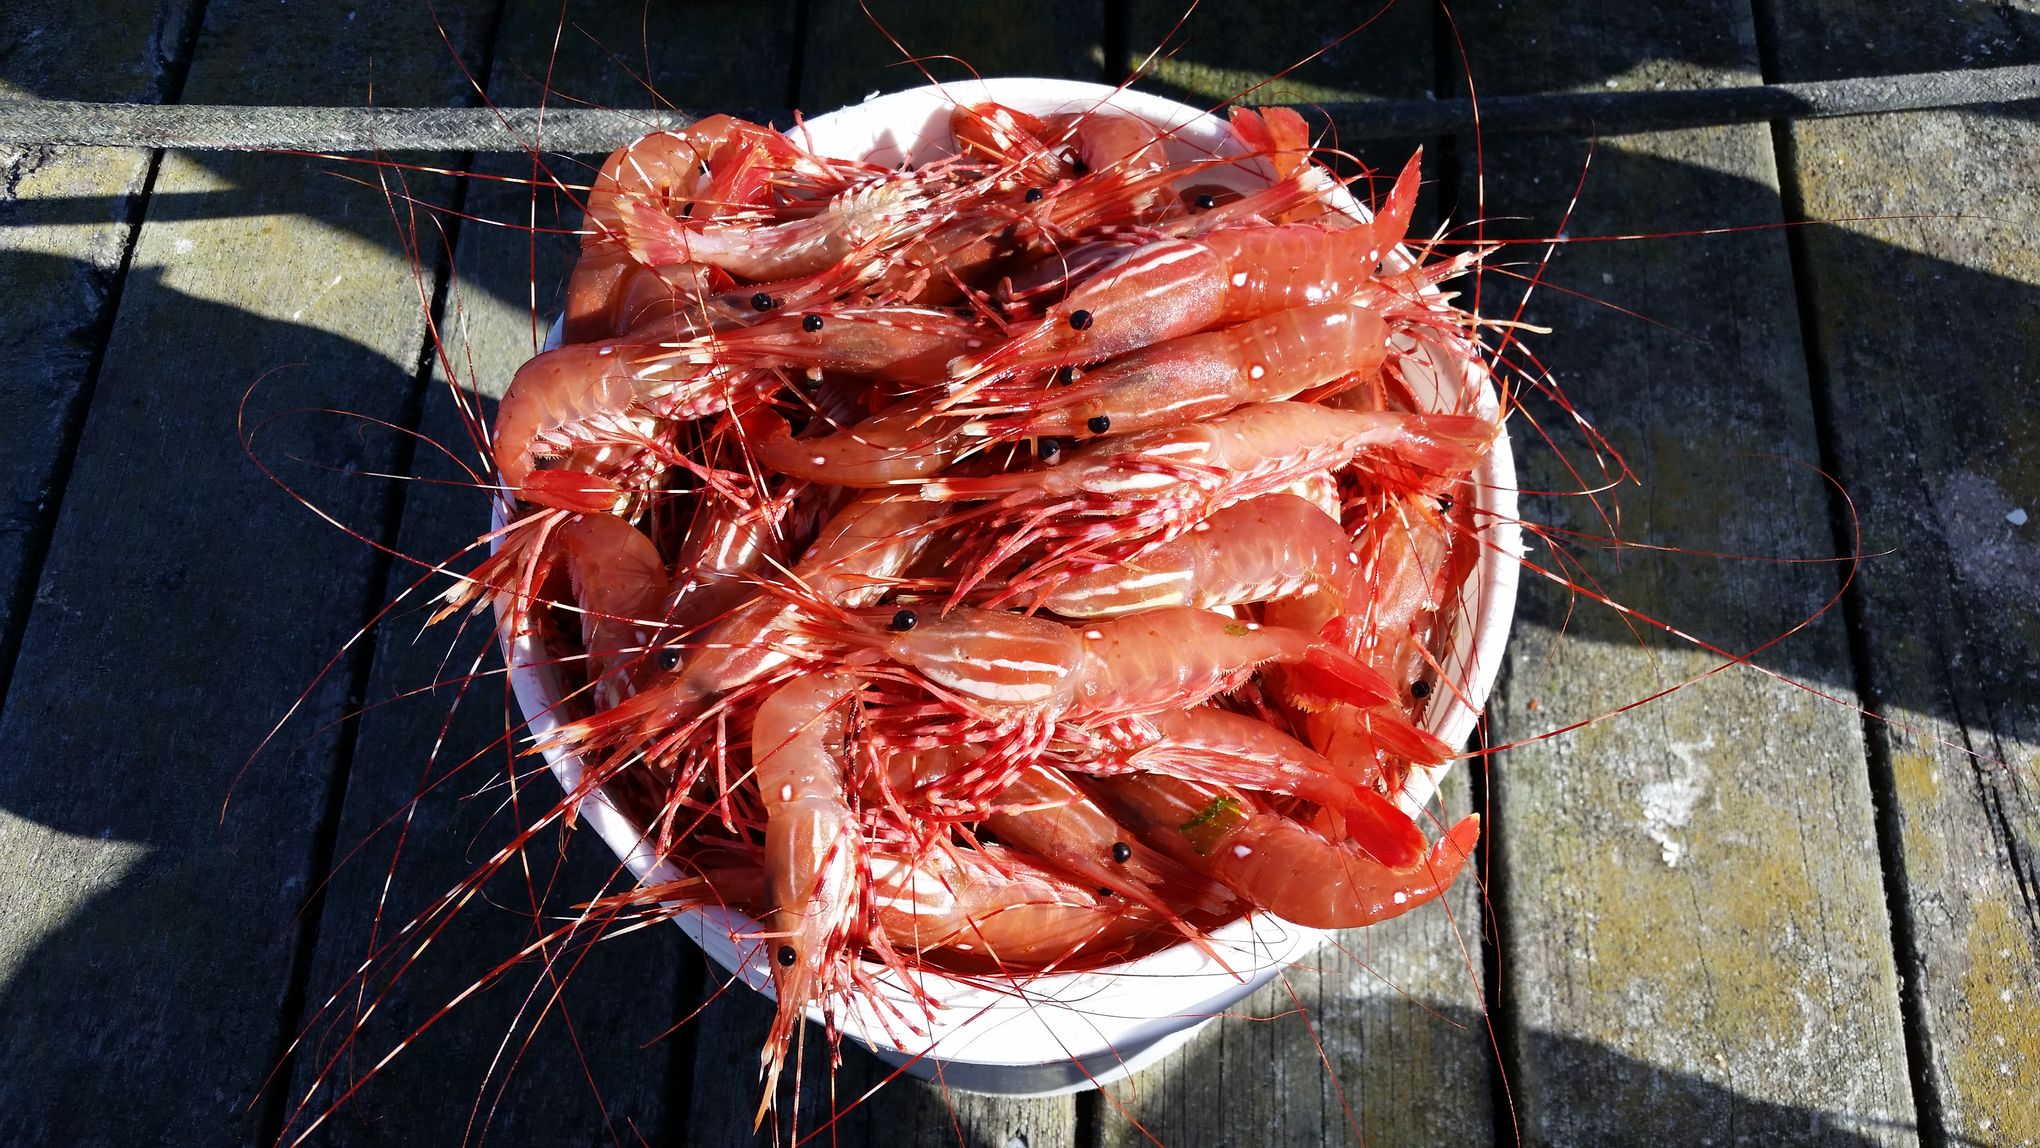 Tony Floor's Tackle Box in May has bucket full of spot shrimp and cooler  filled with lingcod and halibut